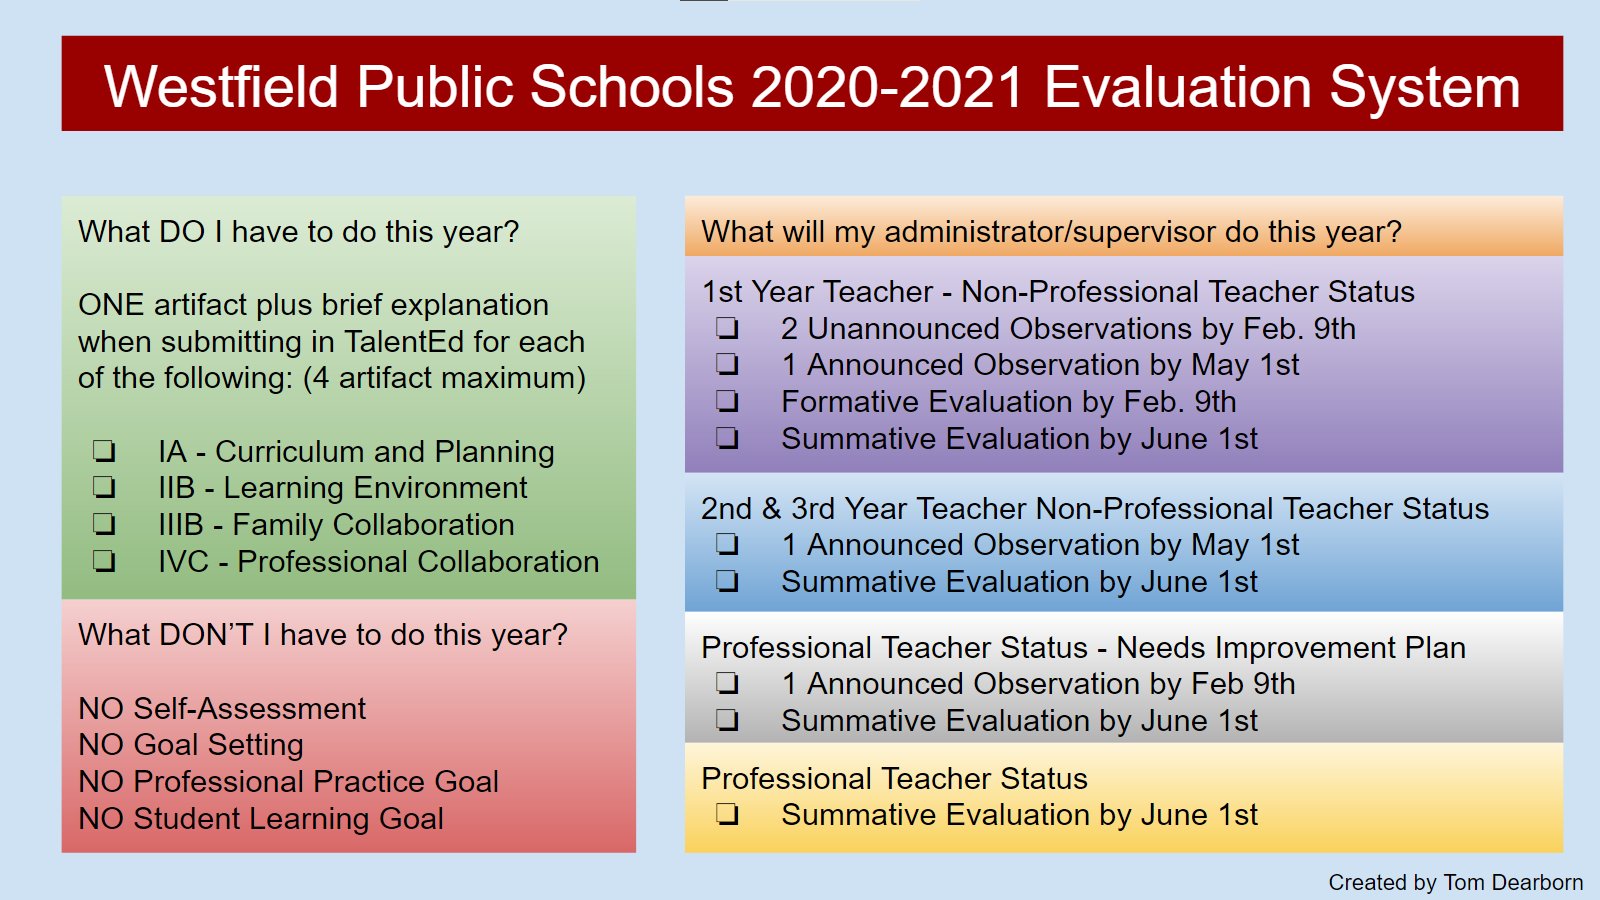 Evaluation System for 20-21 school year.